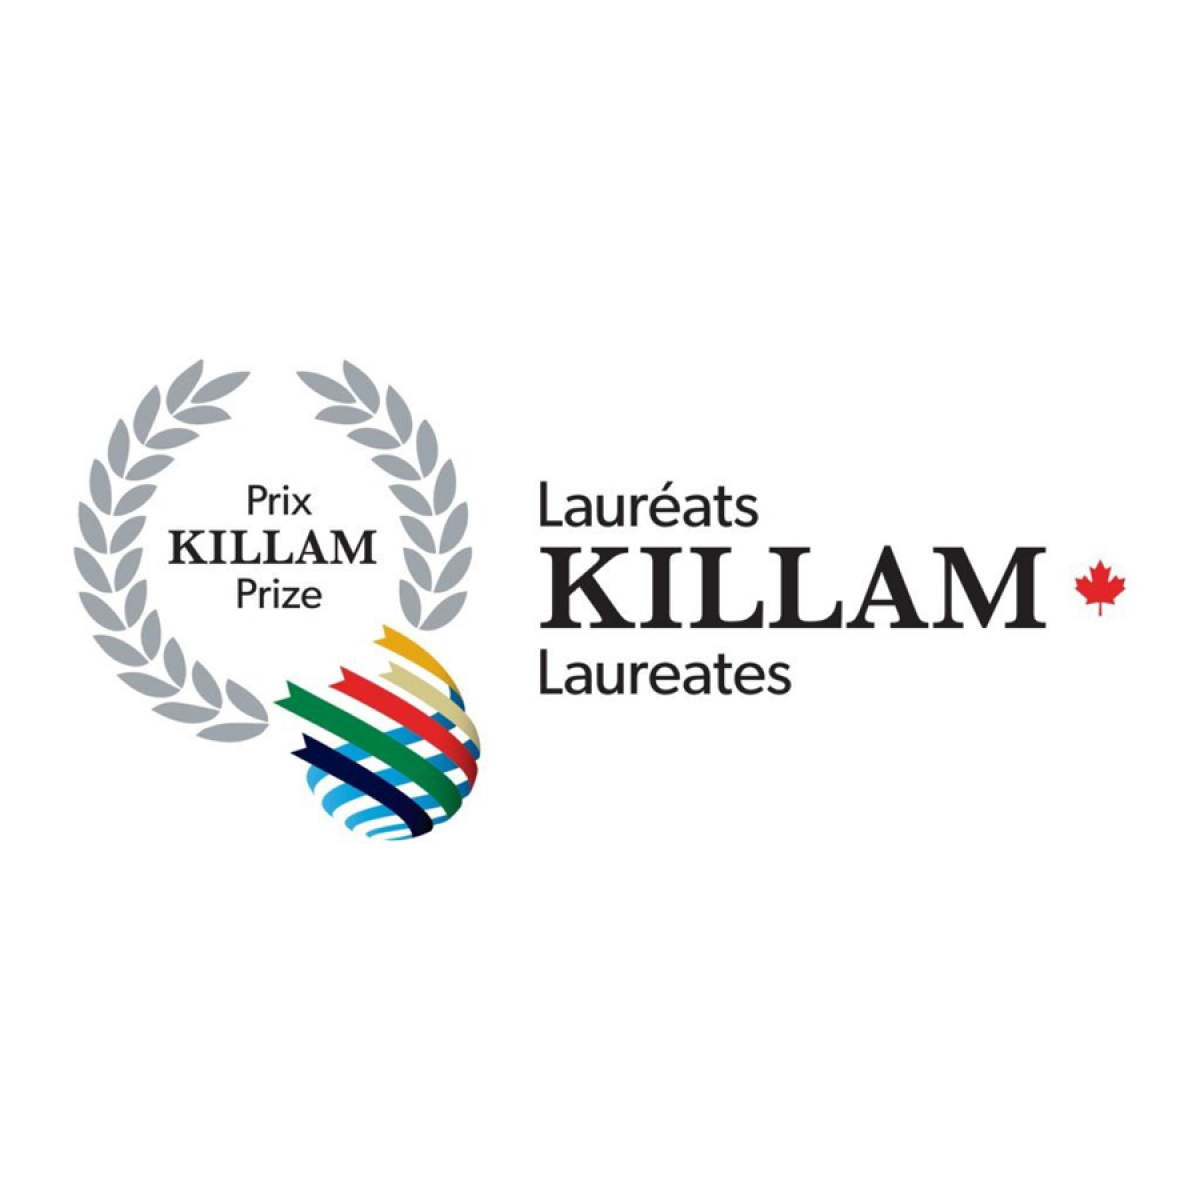 A square image with the logos for the Killam Award and the Killam Laureates positioned in the centre on a white background. The logos include the Canadian leaf symbol and a grey laurel.